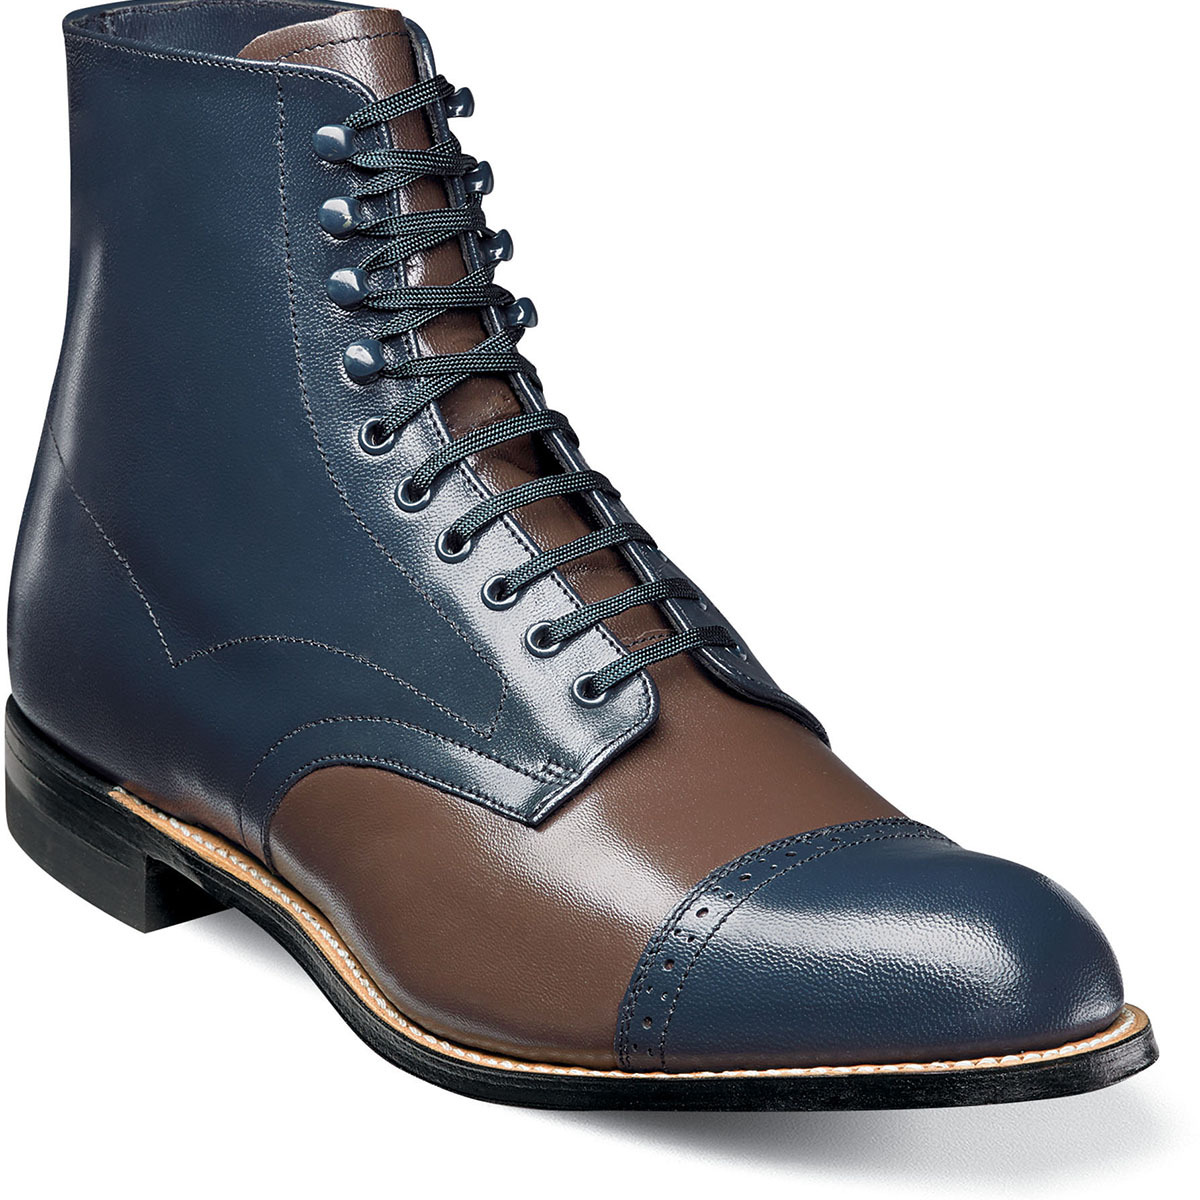 High Ankle Two Tone Genuine Leather Rounded Cap Toe Handmade Lace Up Boots